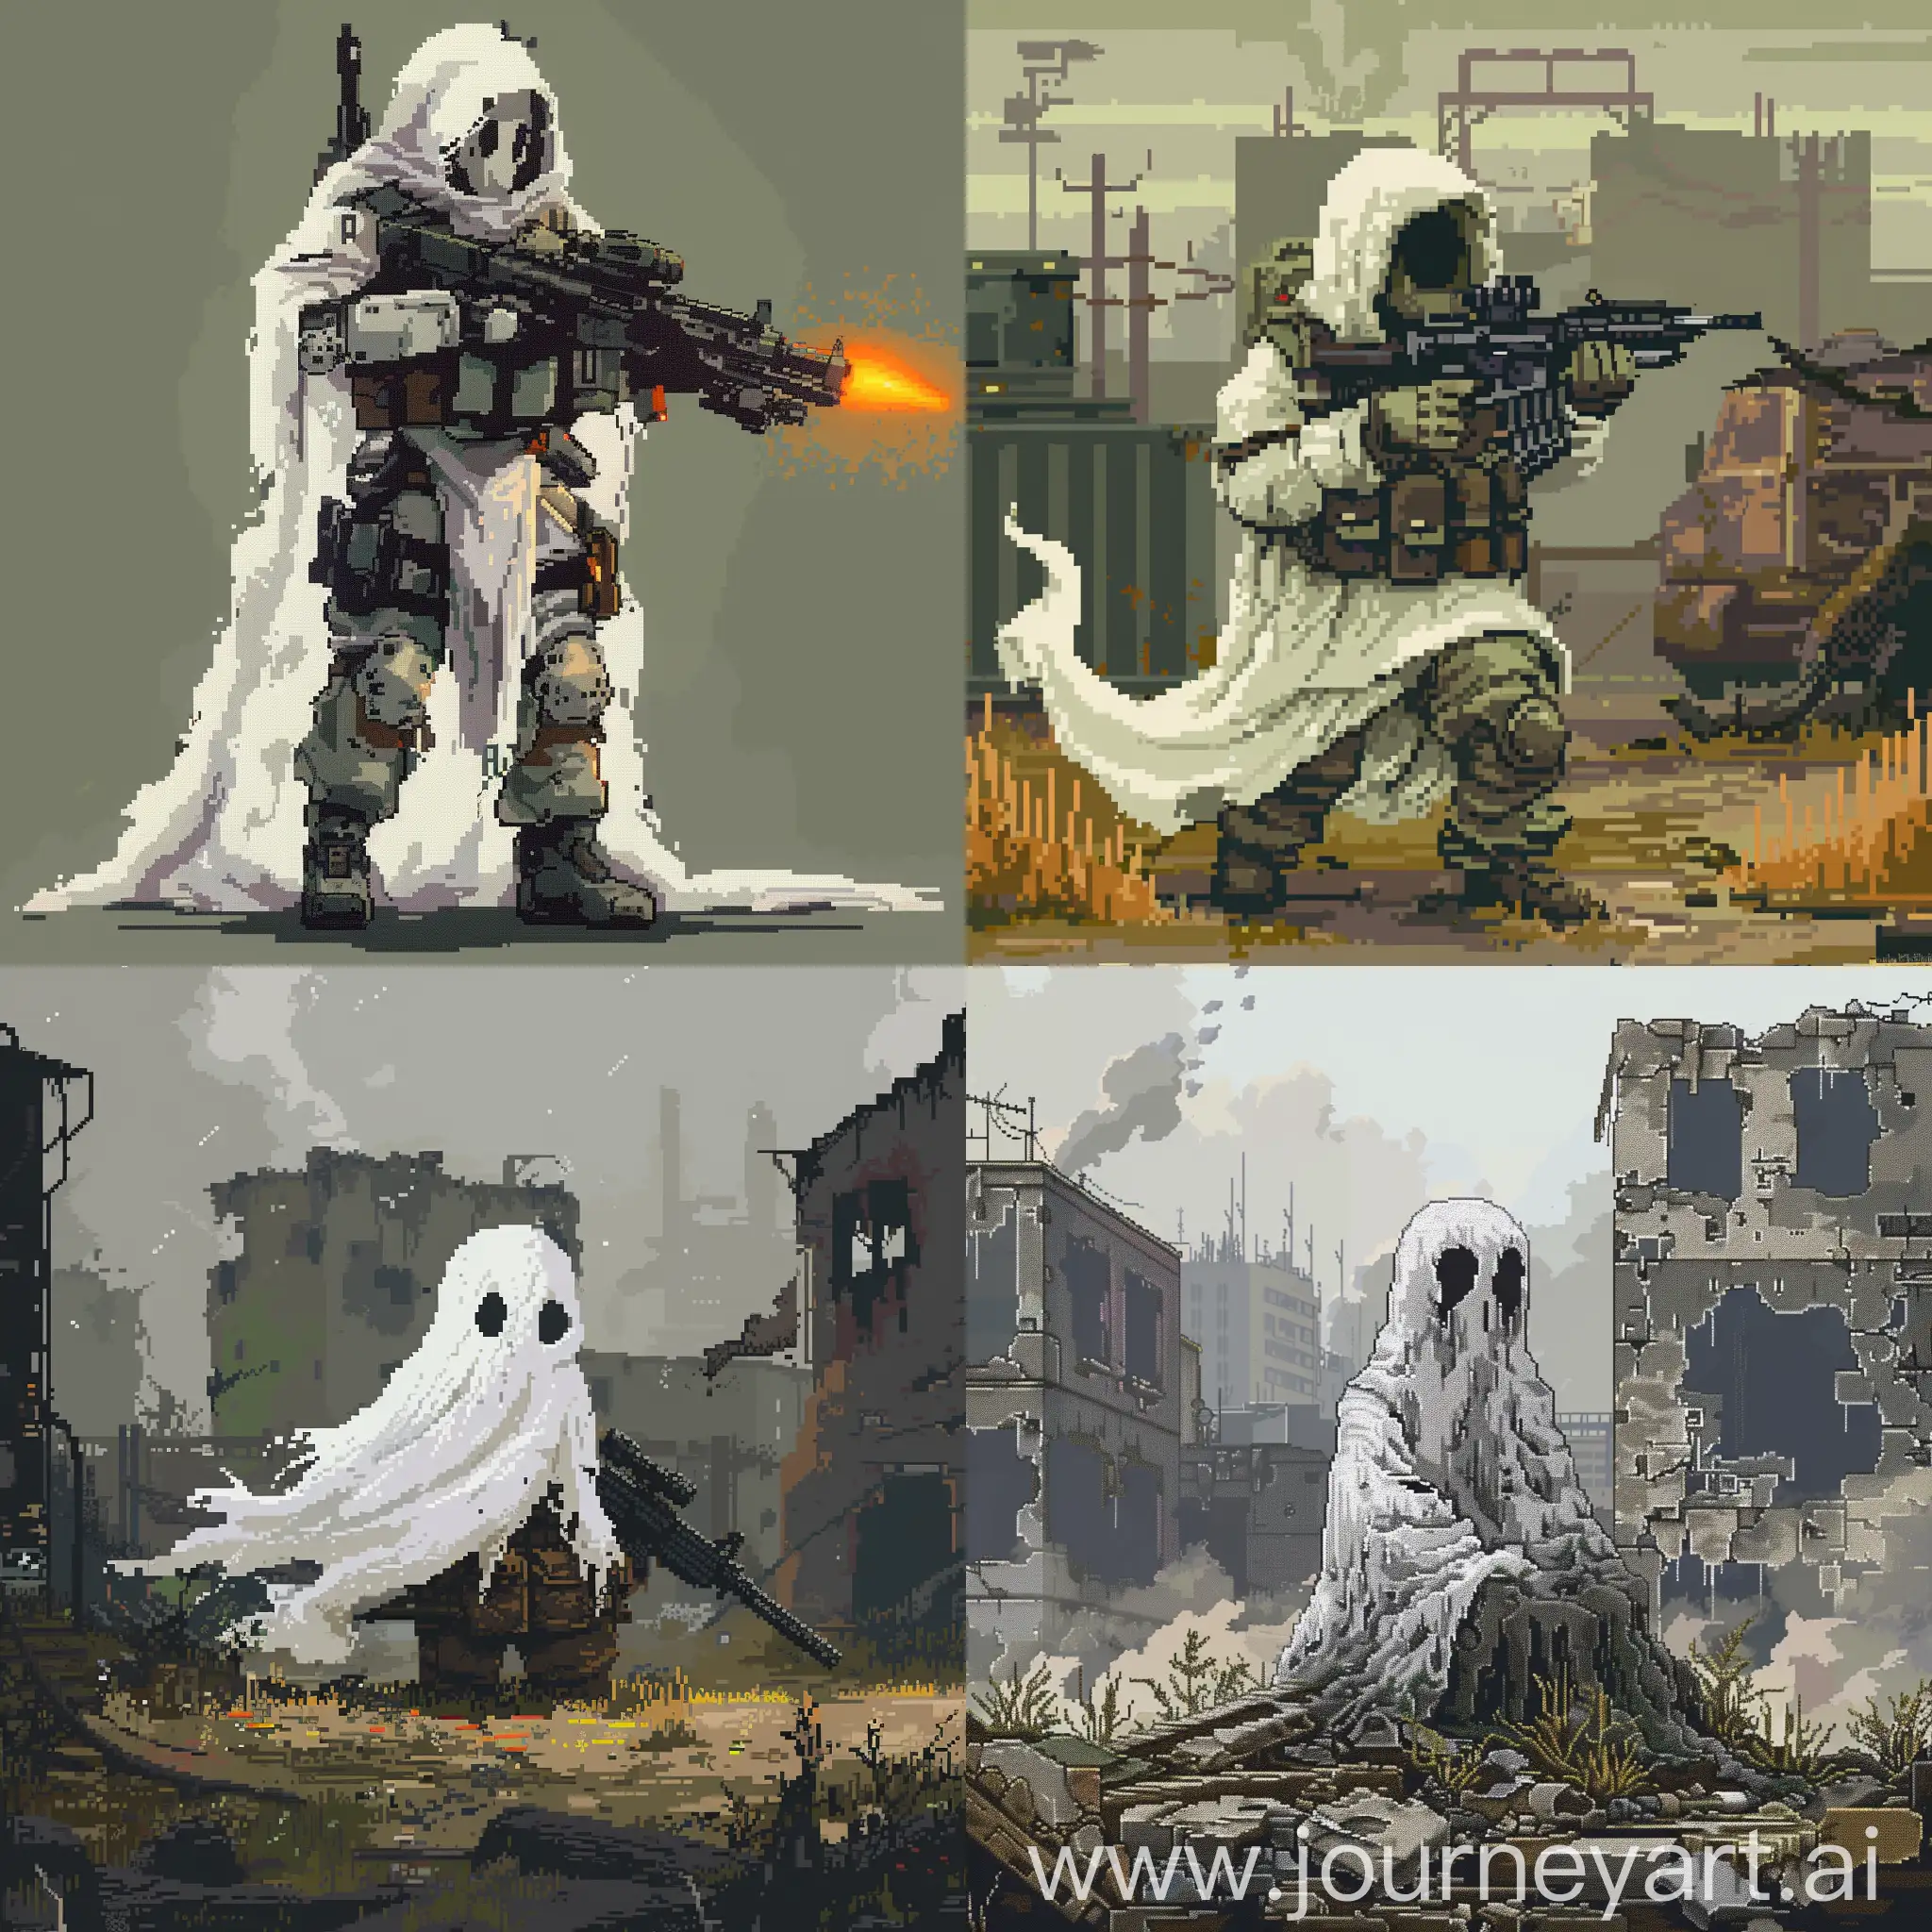 Ethereal-Ghost-in-Pixelated-Warzone-Environment